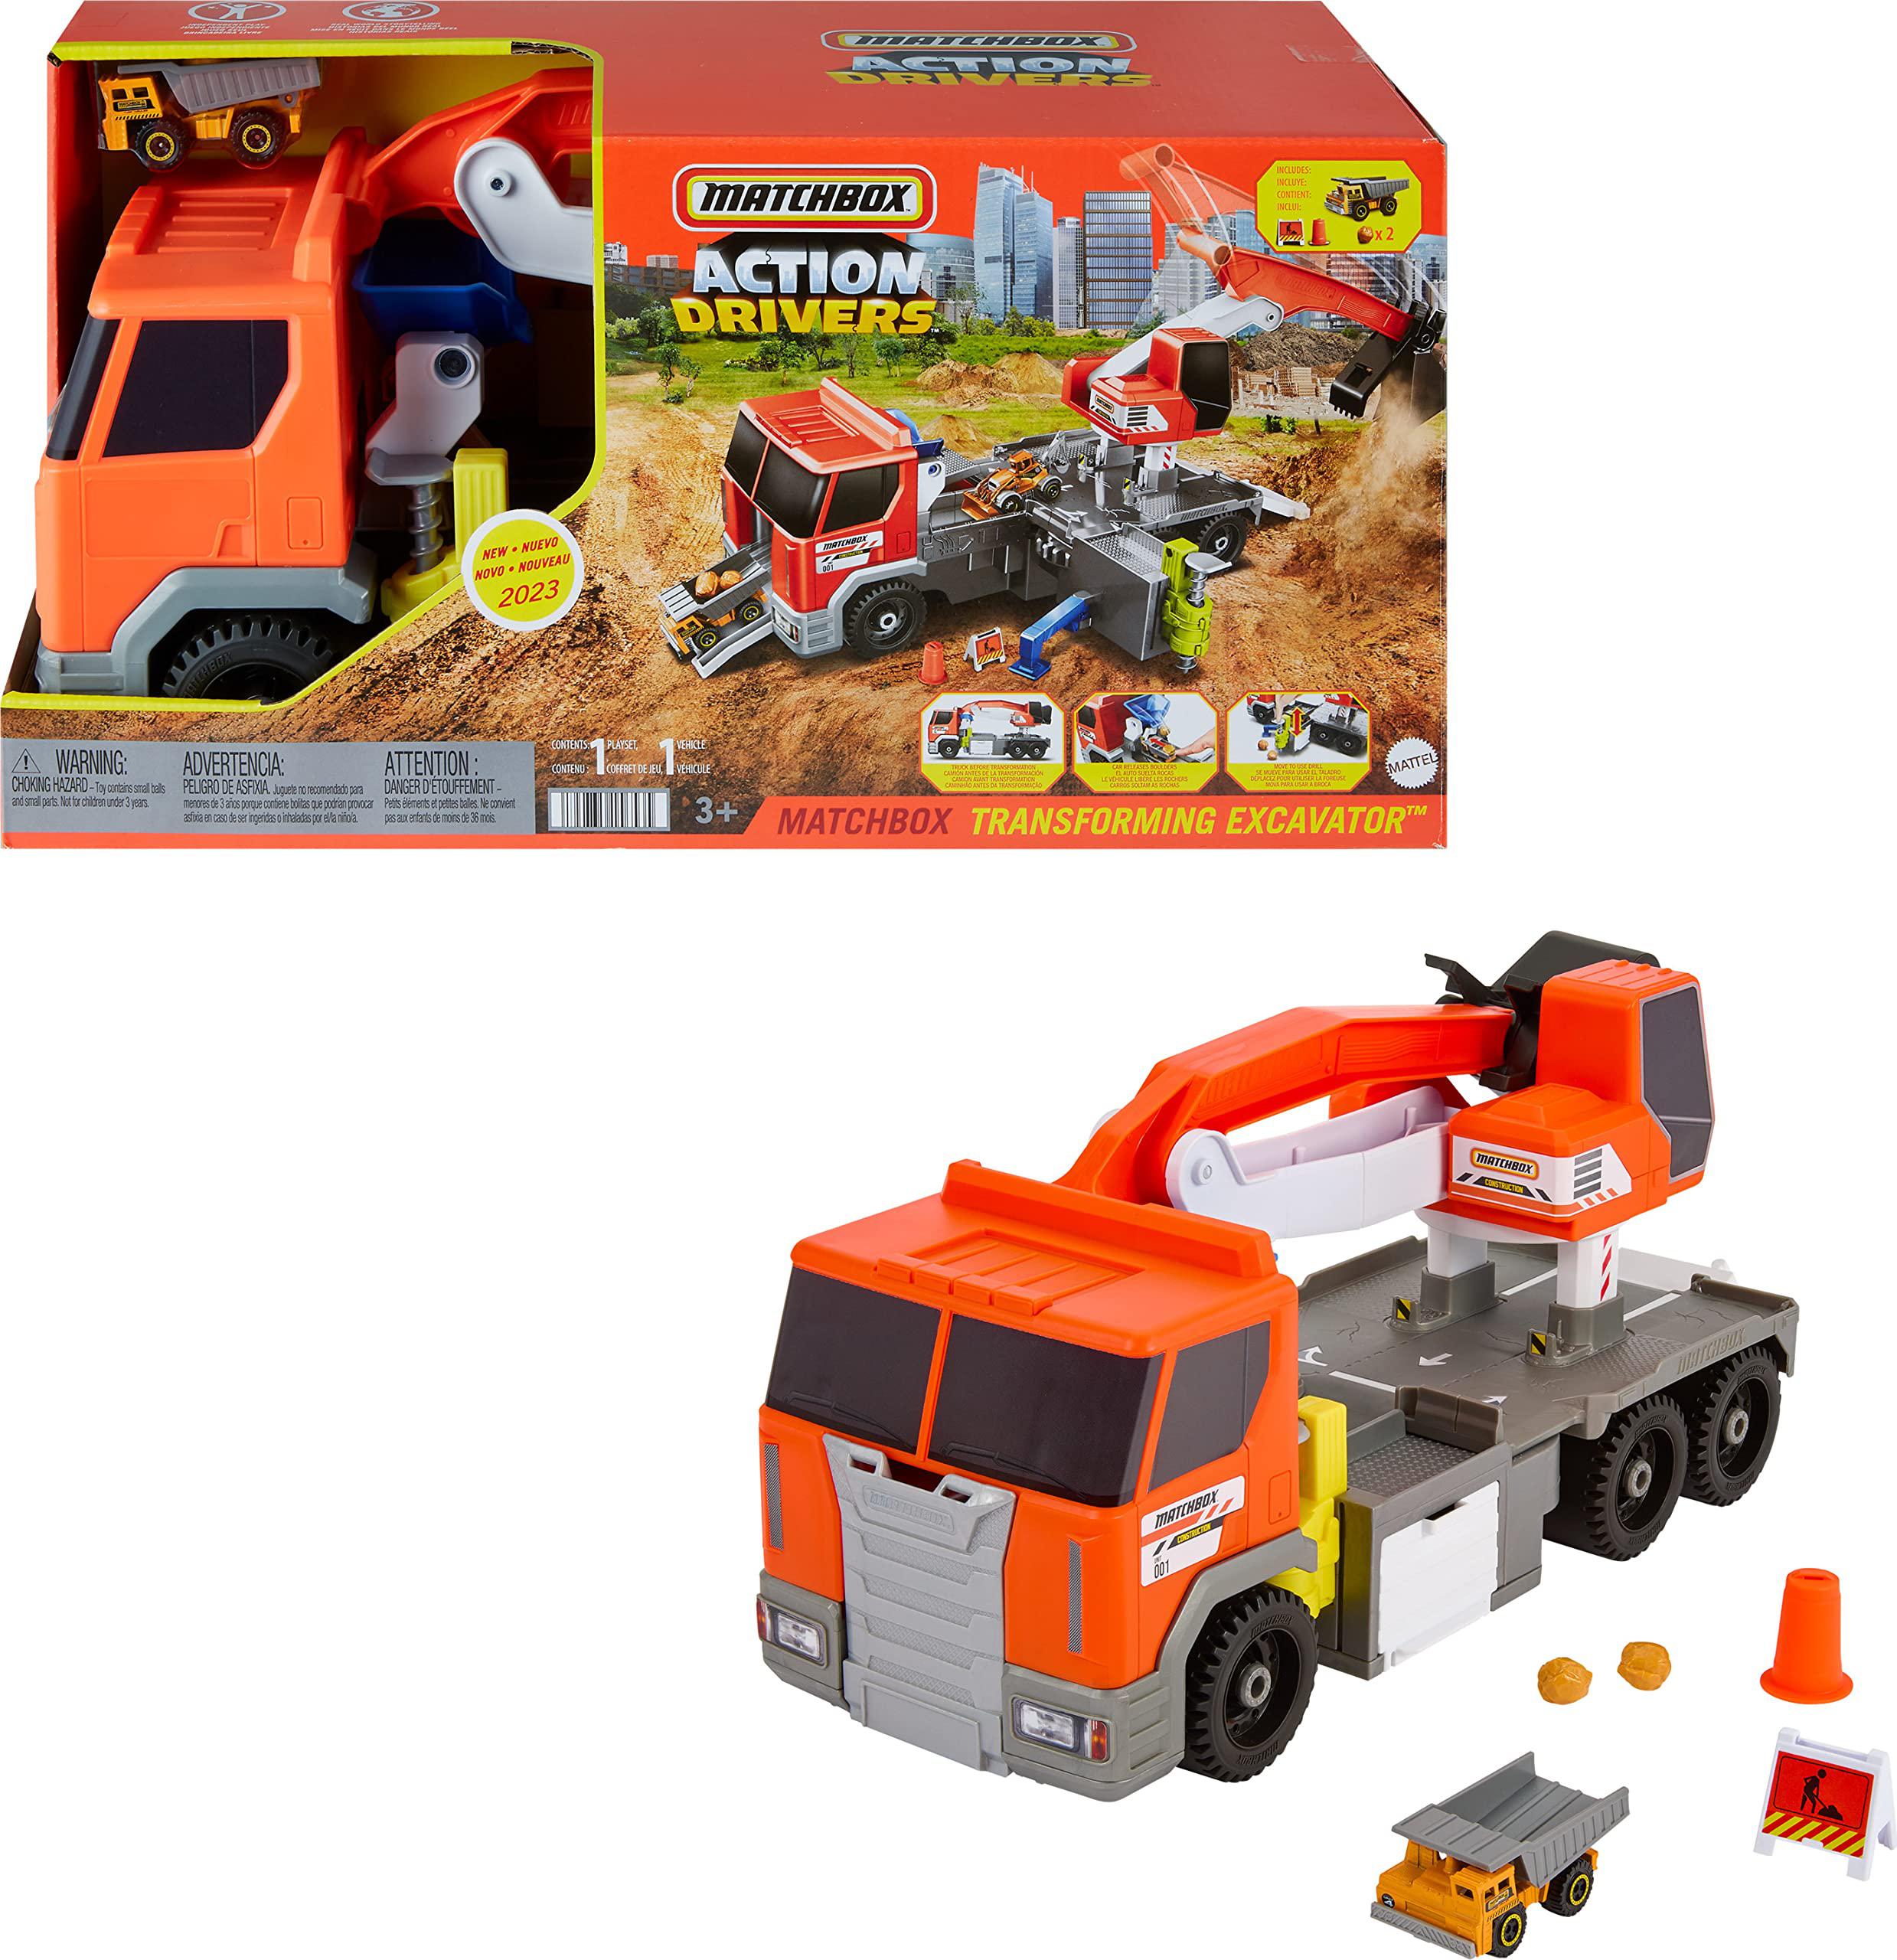 matchbox action drivers matchbox transforming excavator, large-scale toy truck & playset with 1:64 scale vehicle & 4 construc